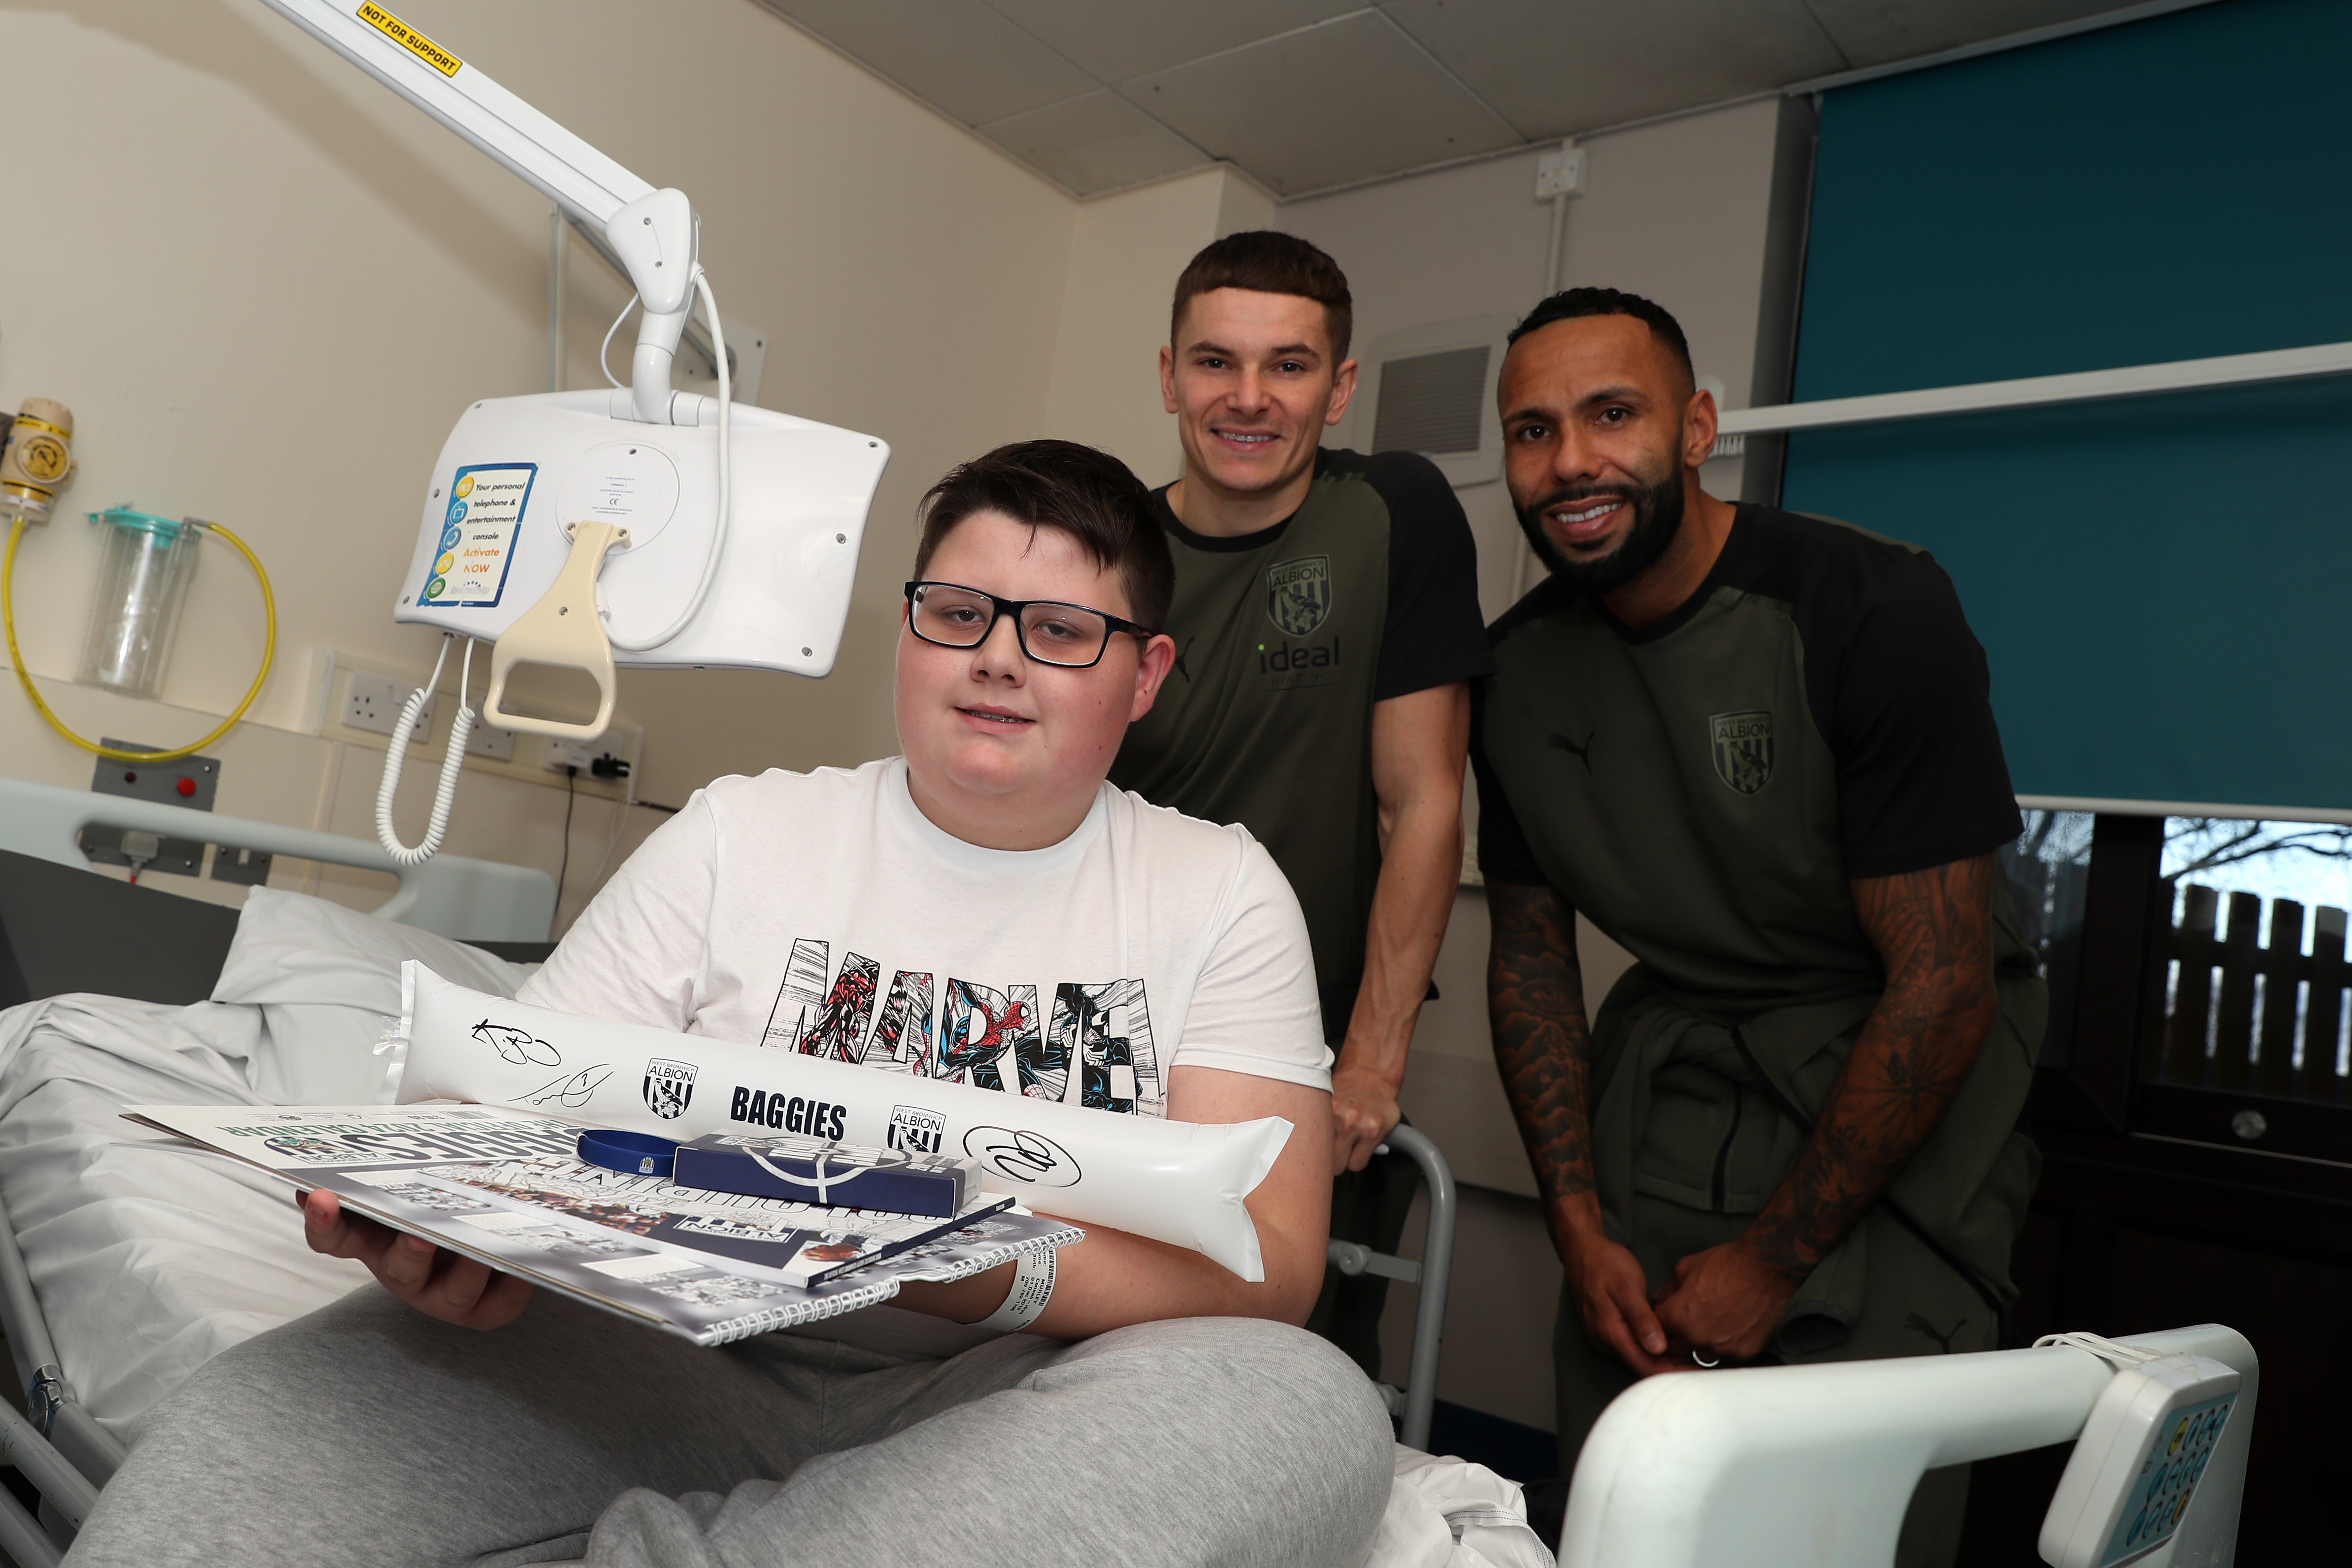 Conor Townsend and Kyle Bartley pose for a photo with patients at Sandwell General Hospital